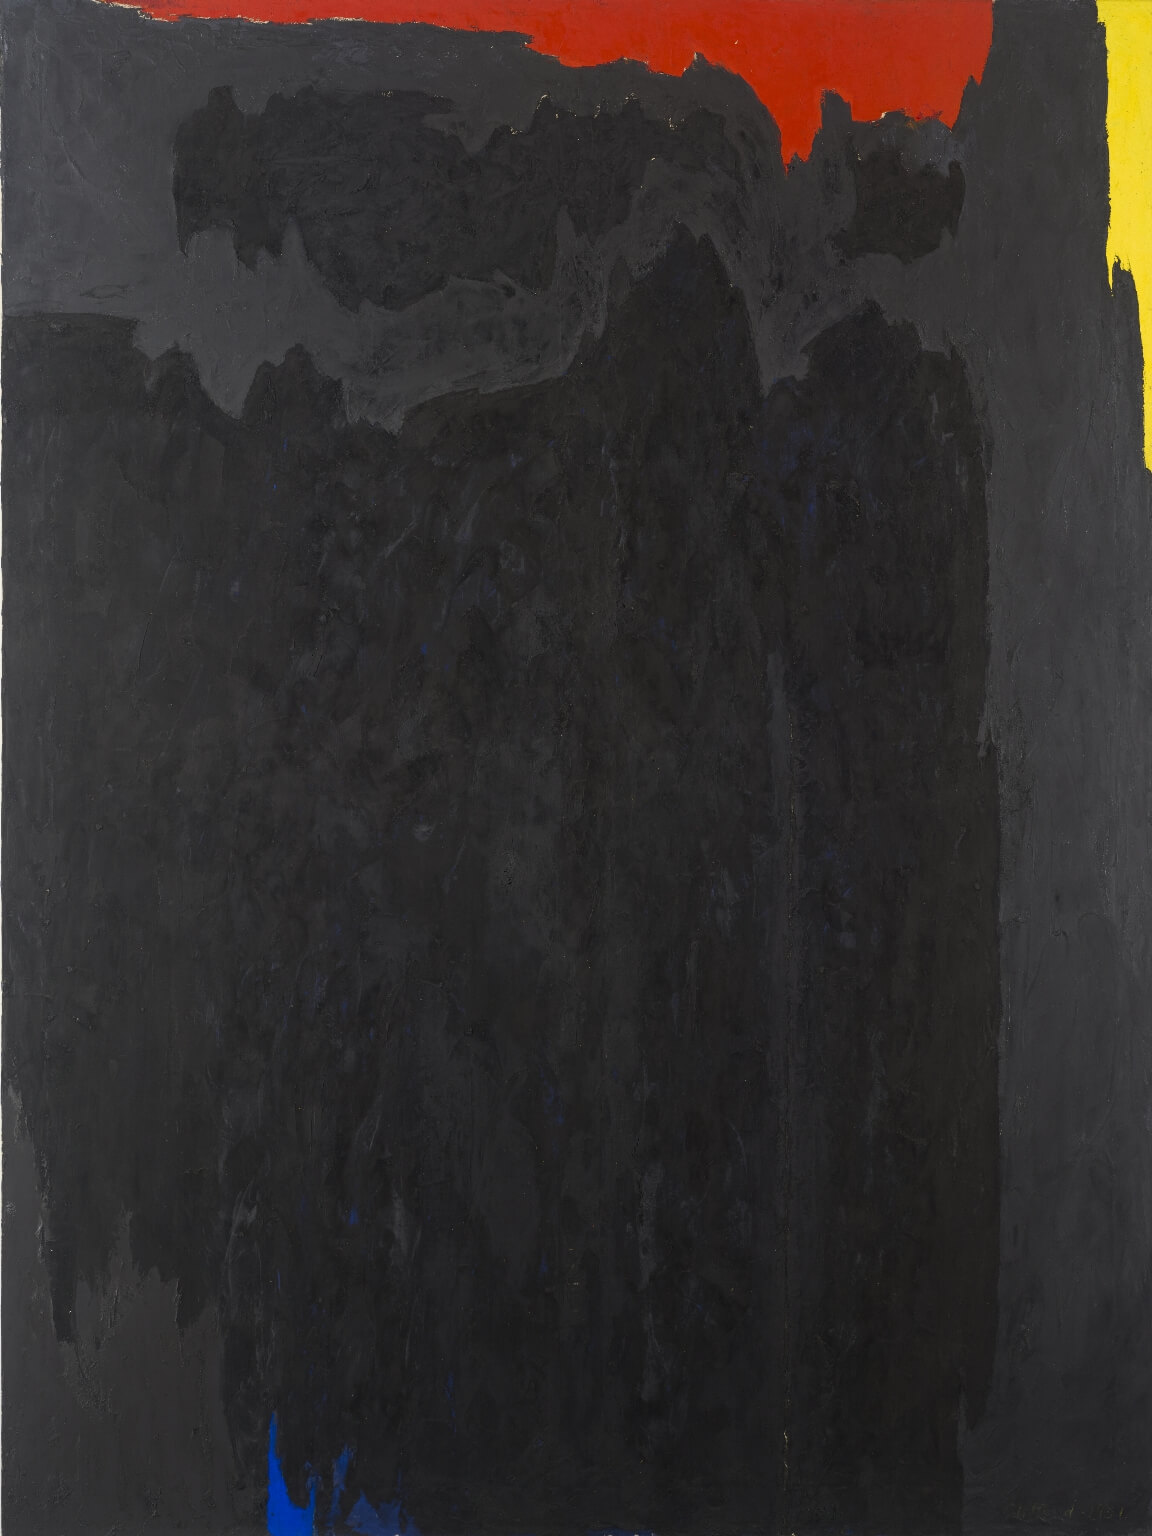 Vertical abstract oil painting almost completely covered in black paint, with an area of very dark gray at the top and small sections of yellow and red